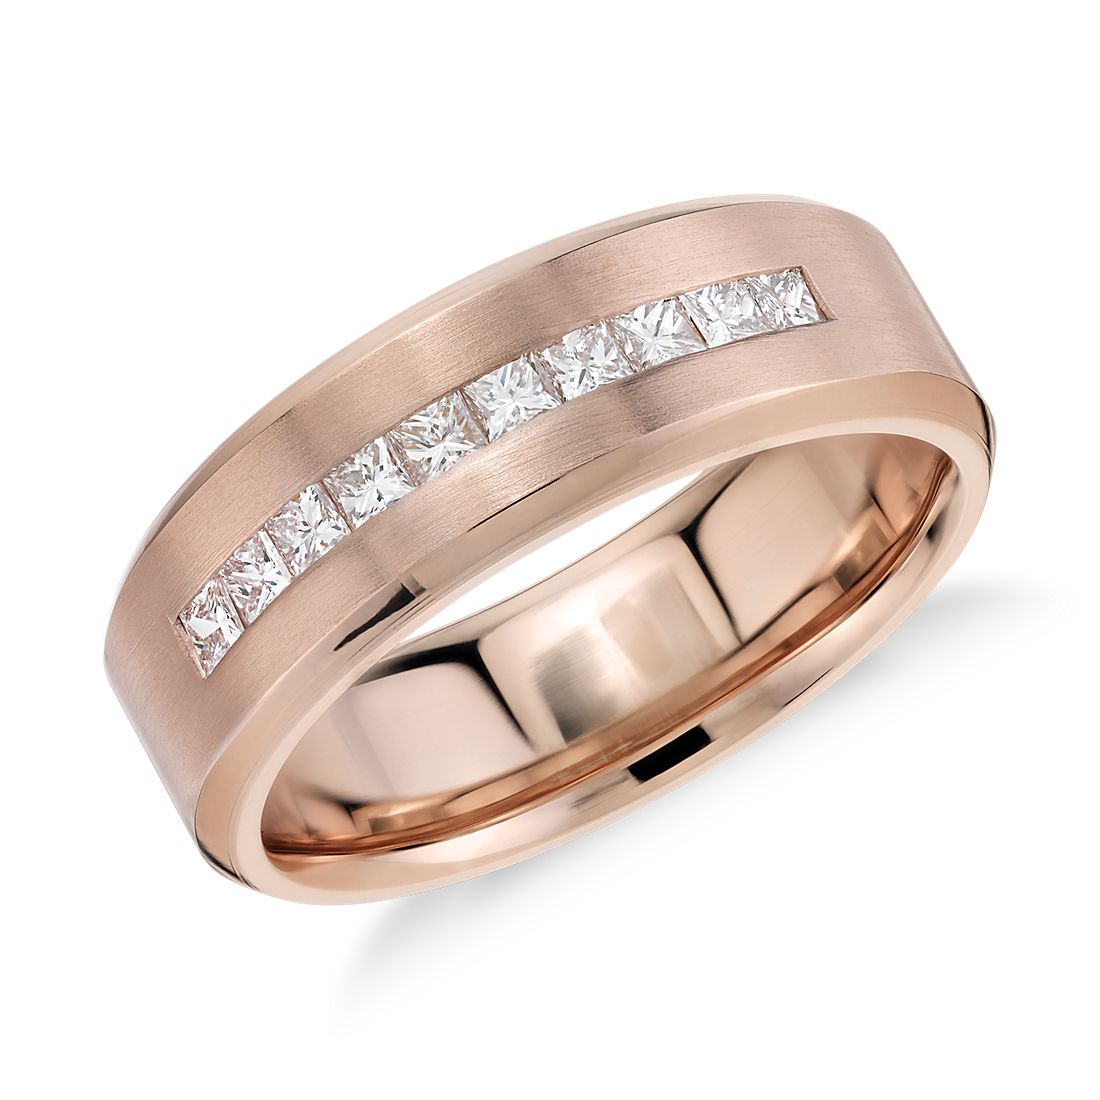 1/2 CT Princess Diamond Wedding Band in 14K Gold Channel